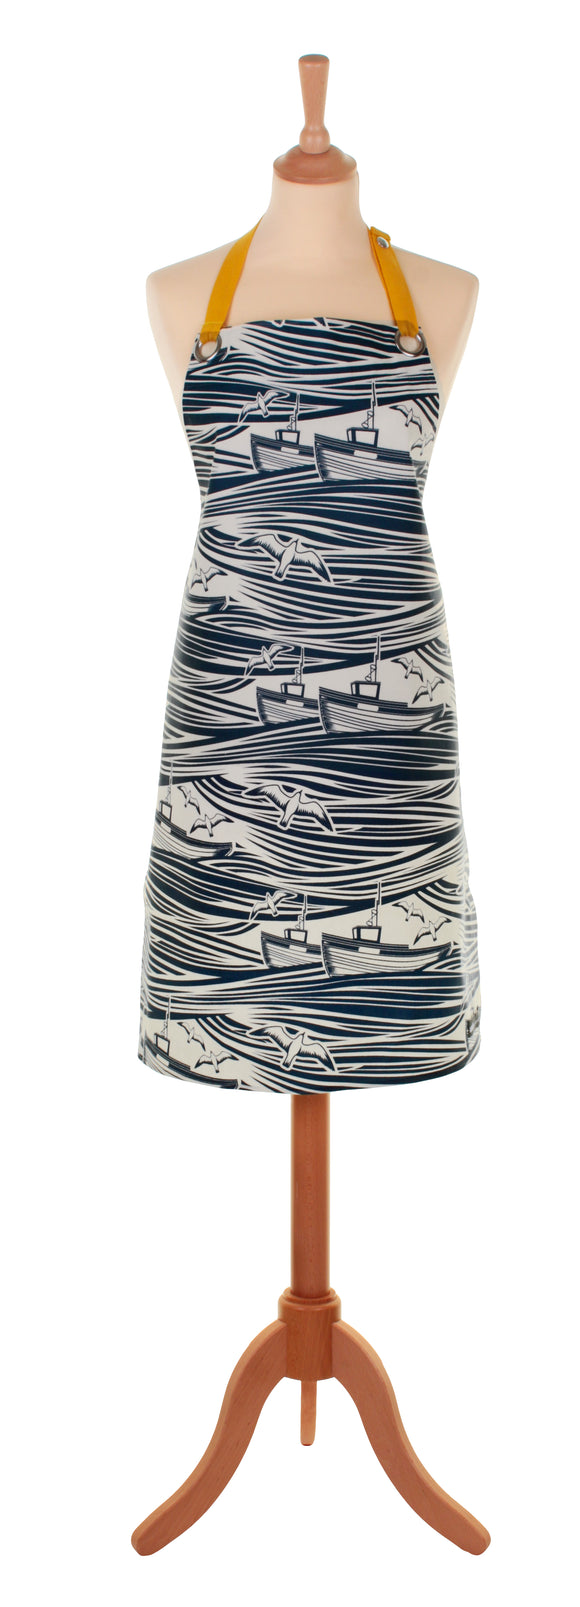 Oil Cloth Apron MM Whitby by Ulster Weavers - Gifteasy Online